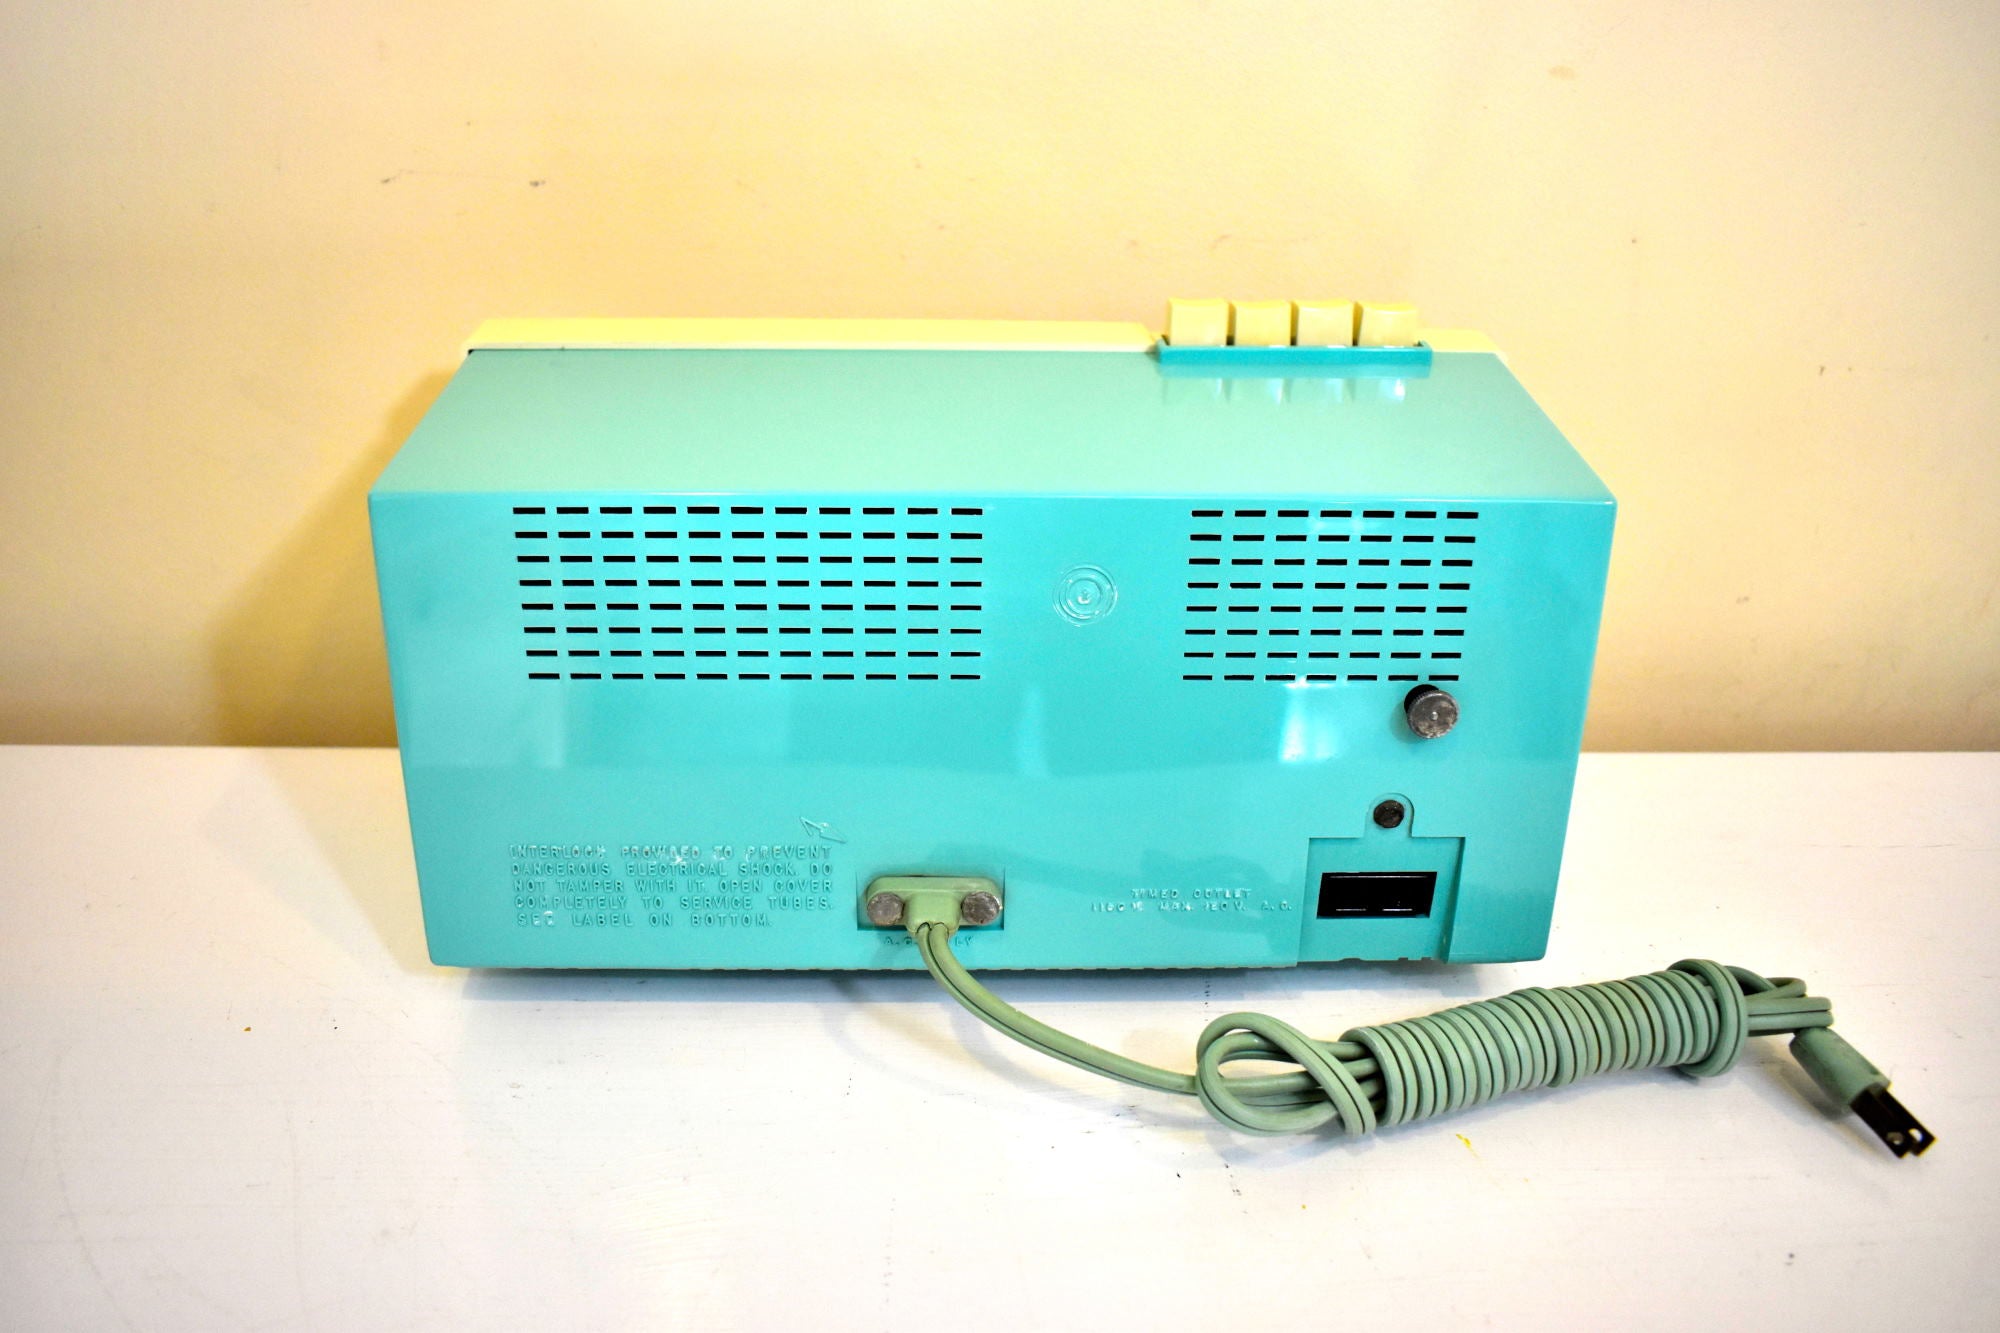 Turquoise and White 1960 General Electric Model C-4518 AM Vintage